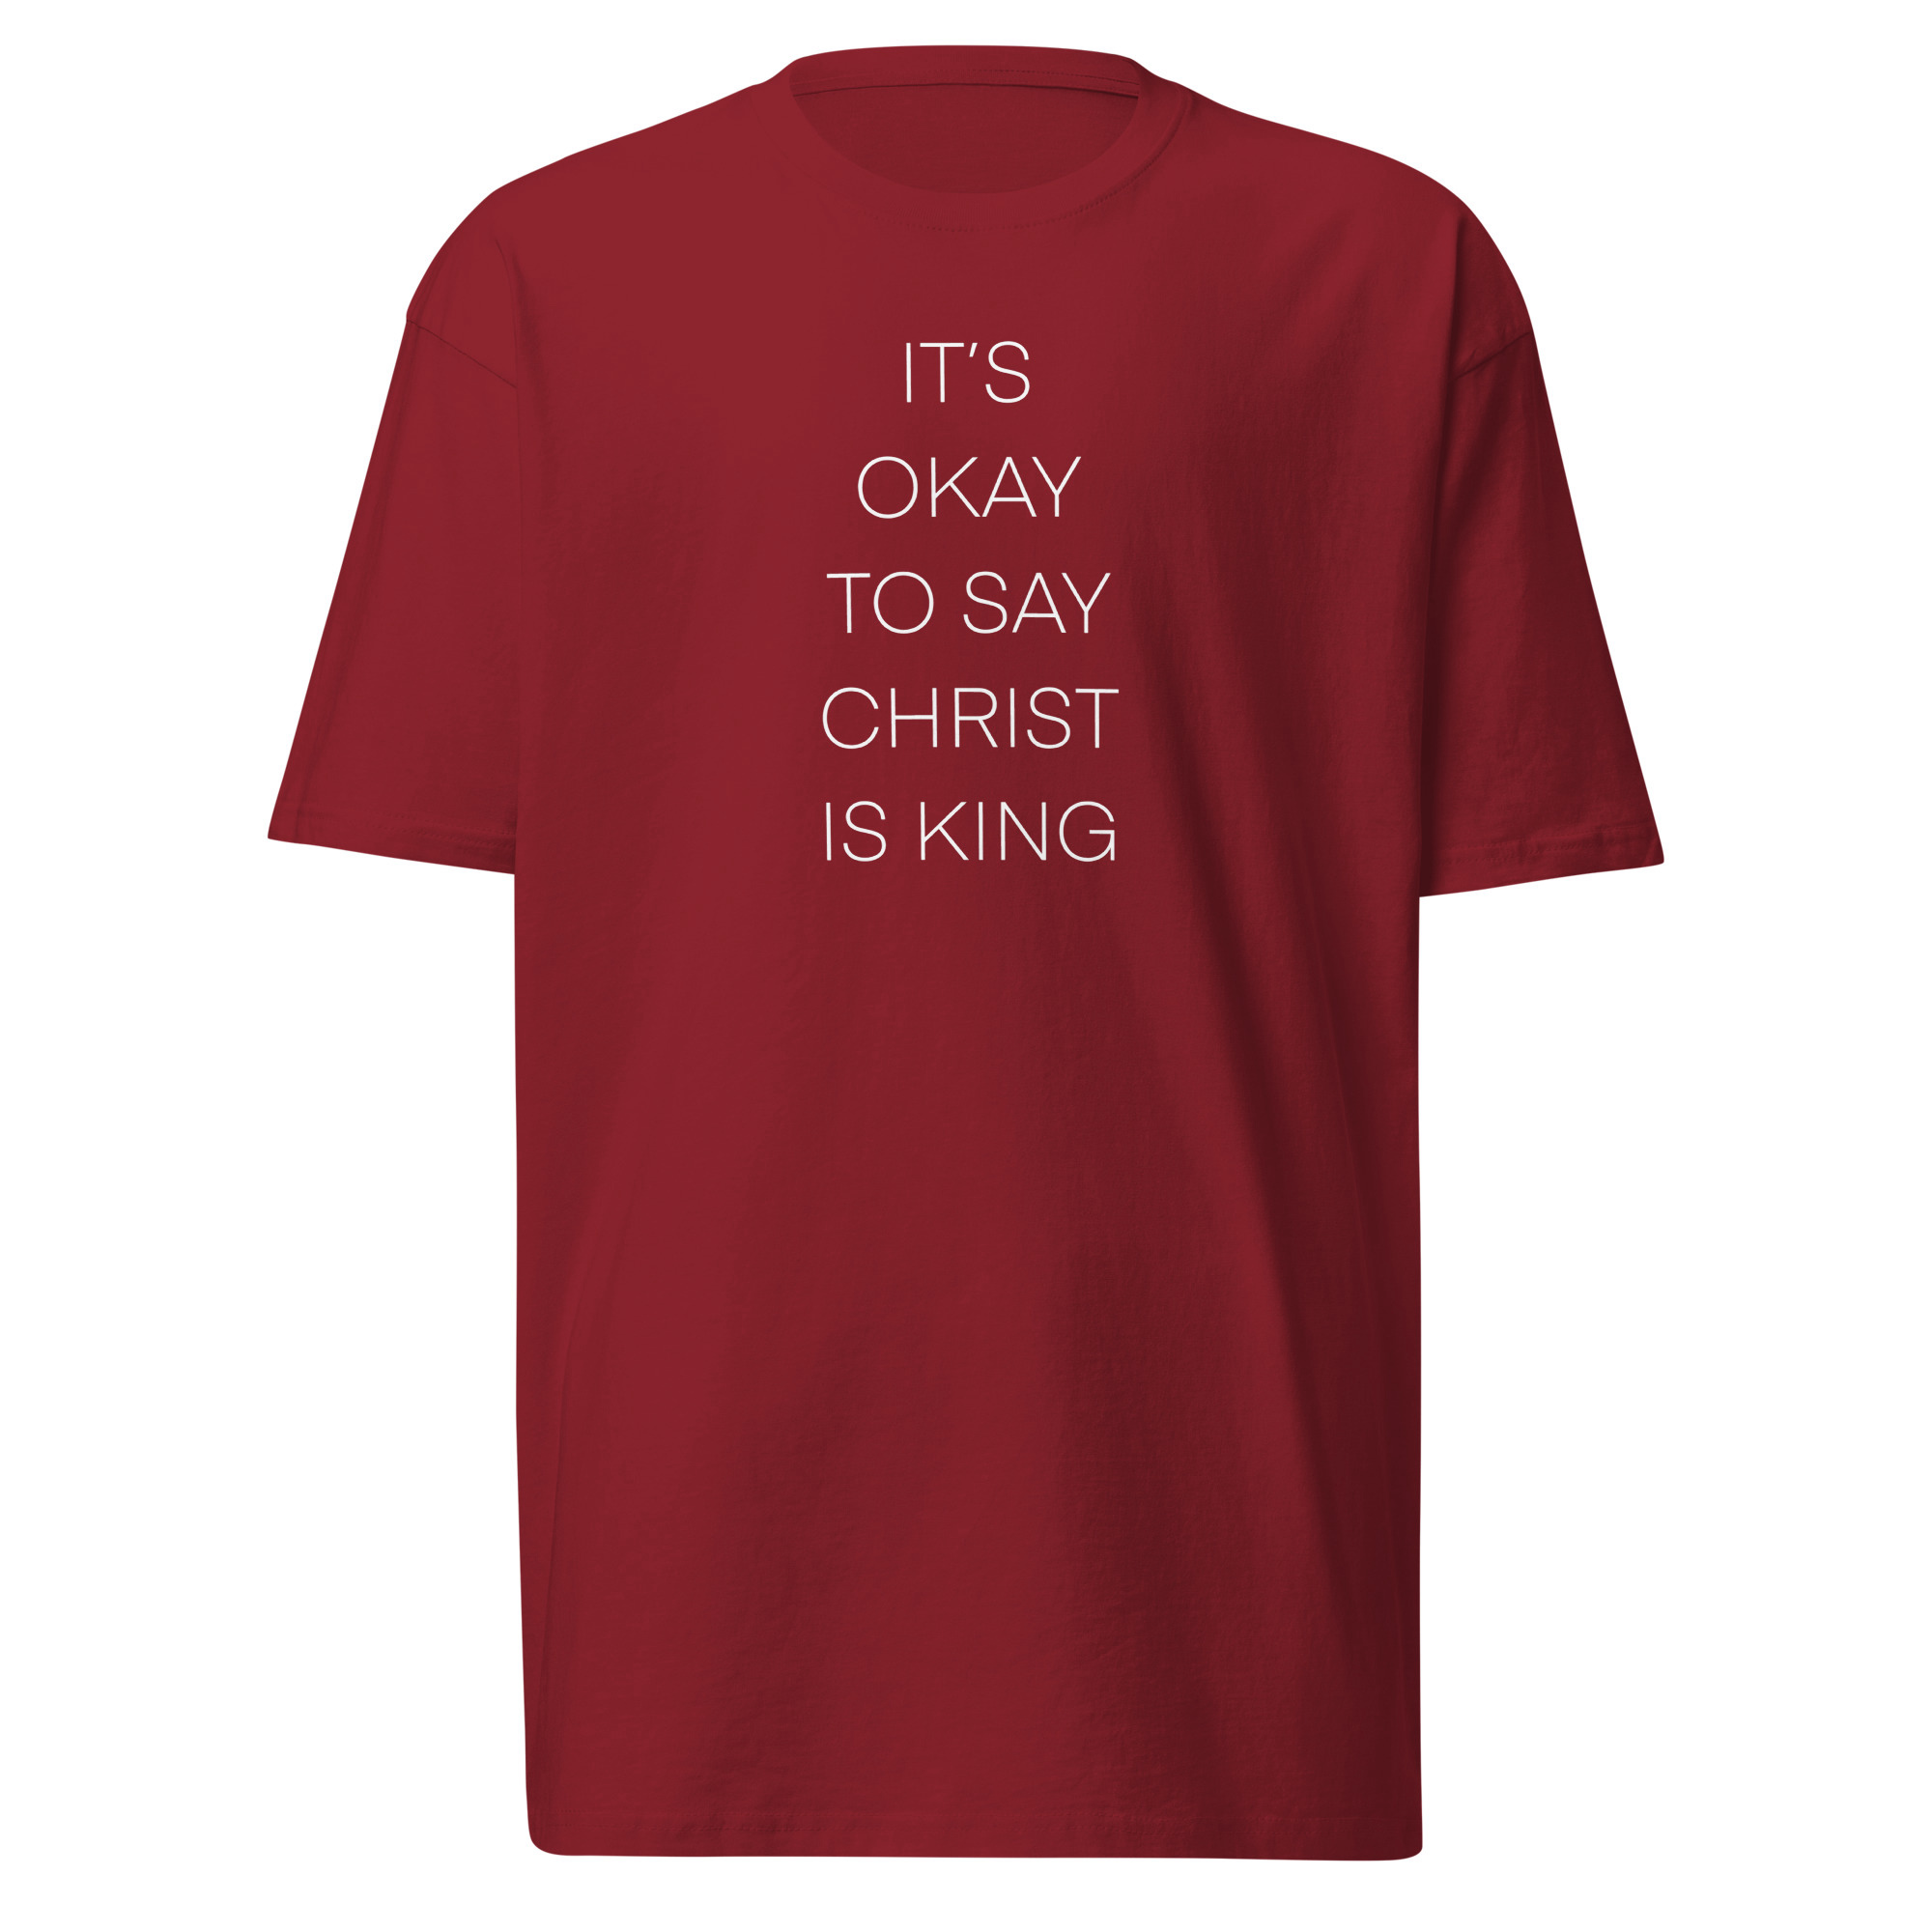 It's Okay To Say Christ Is King T-Shirt - Brick Red / M